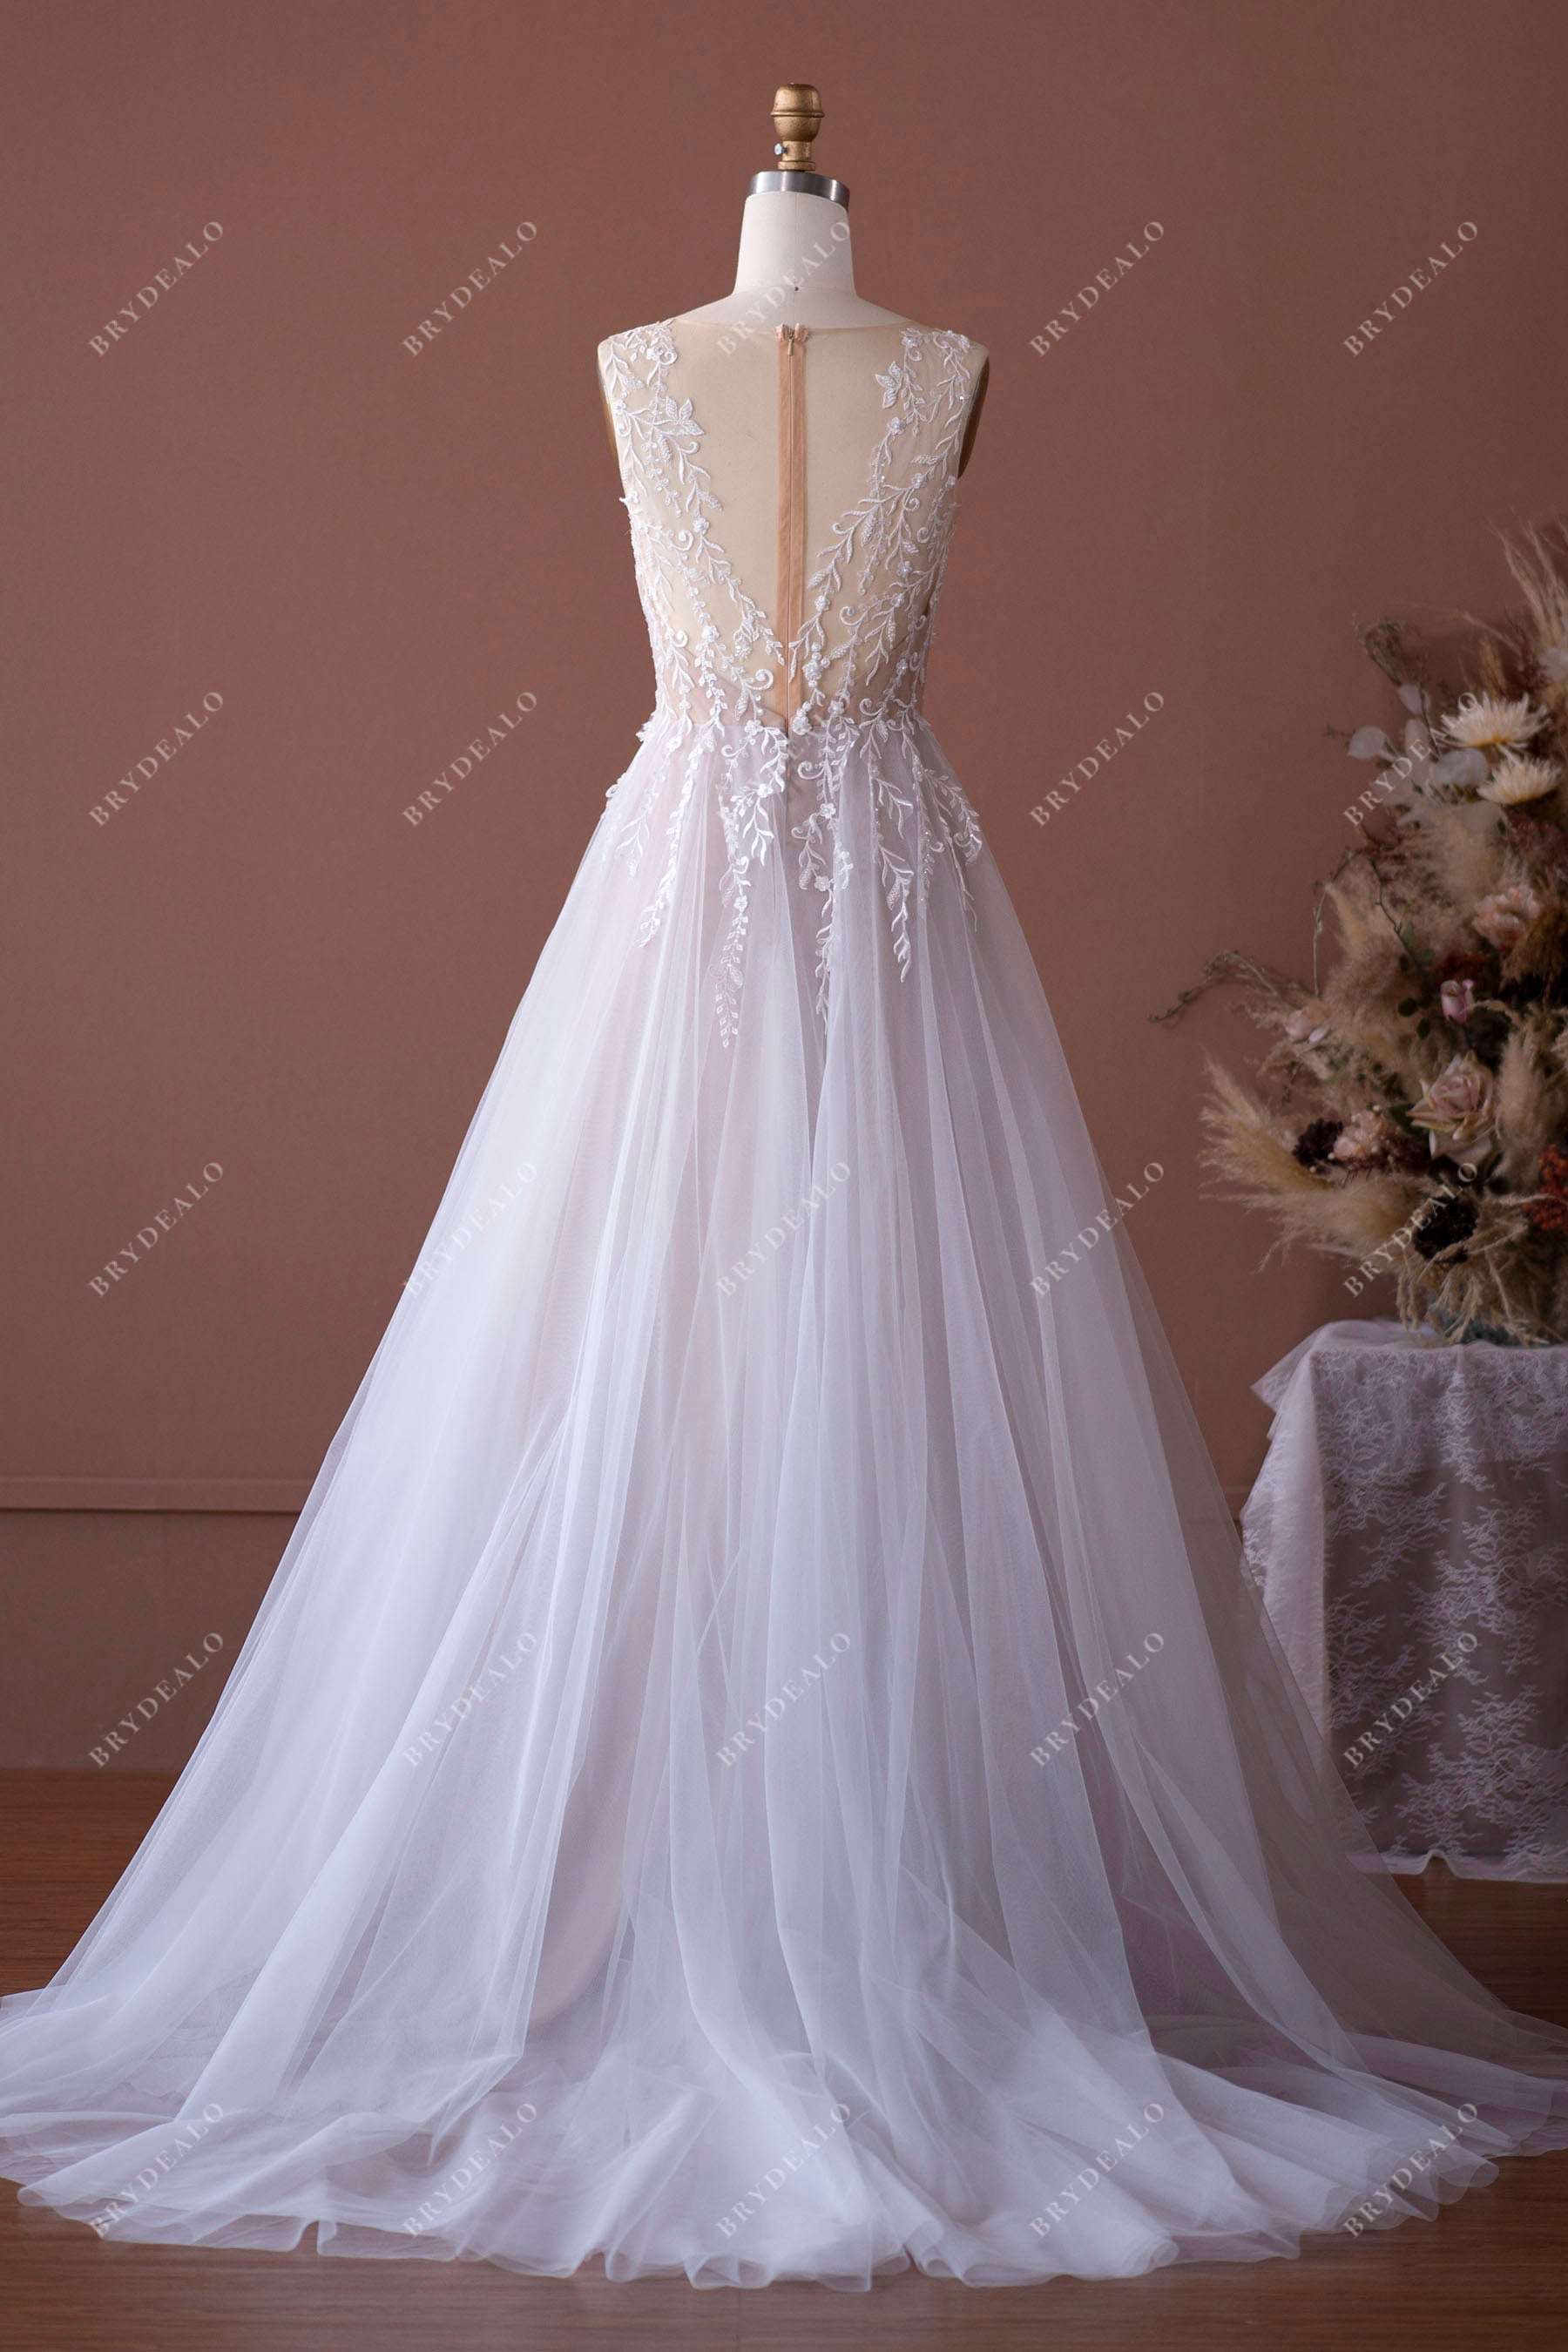 Beaded Lace Illusion Back A-line Garden Bridal Dress